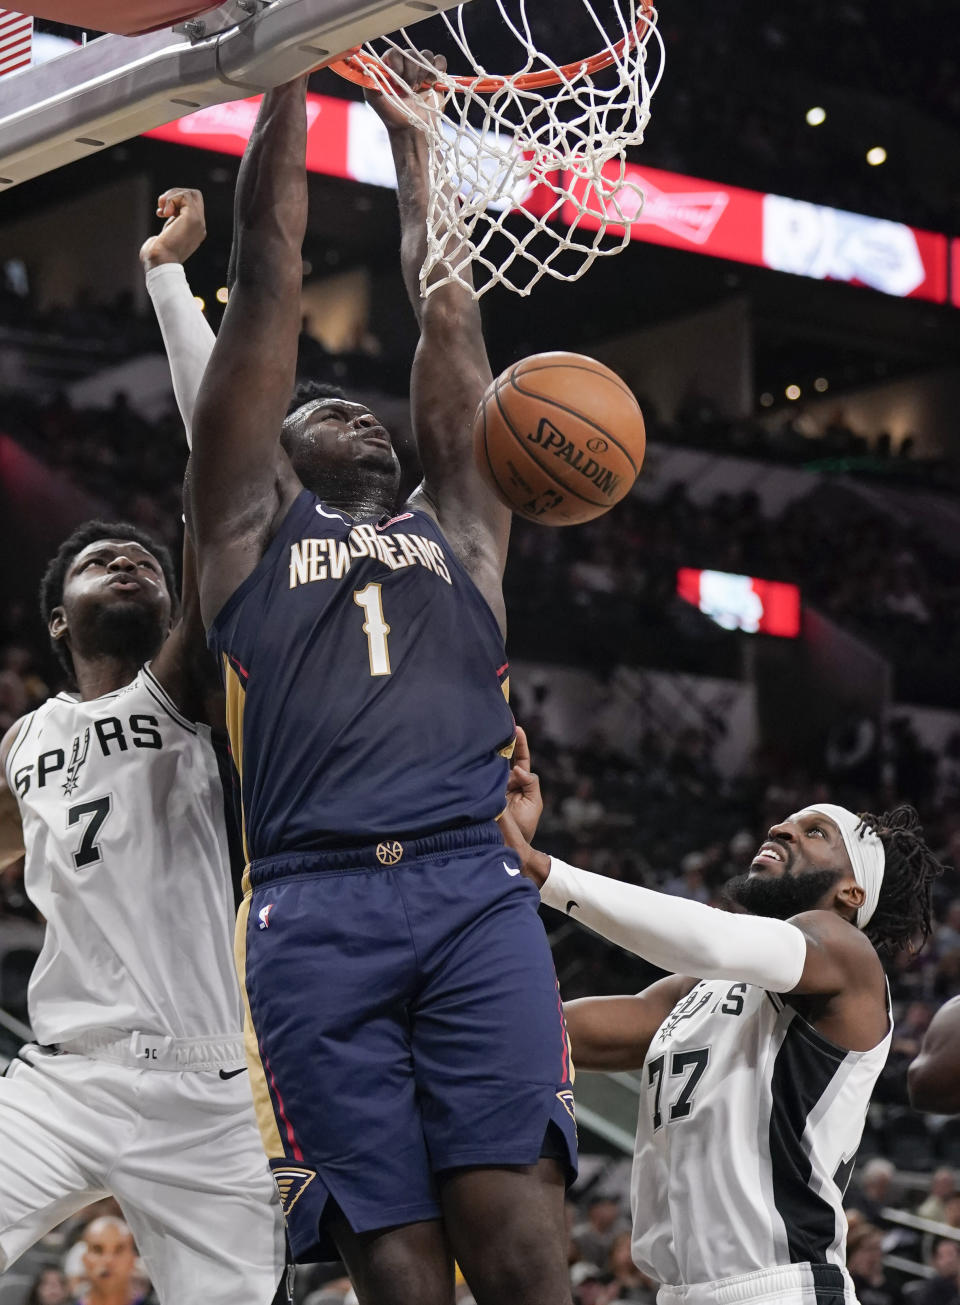 New Orleans Pelicans' Zion Williamson (1) dunks as he is defended by San Antonio Spurs' Chimezie Metu (7) and DeMarre Carroll during the first half of an NBA preseason basketball game, Sunday, Oct. 13, 2019, in San Antonio. (AP Photo/Darren Abate)